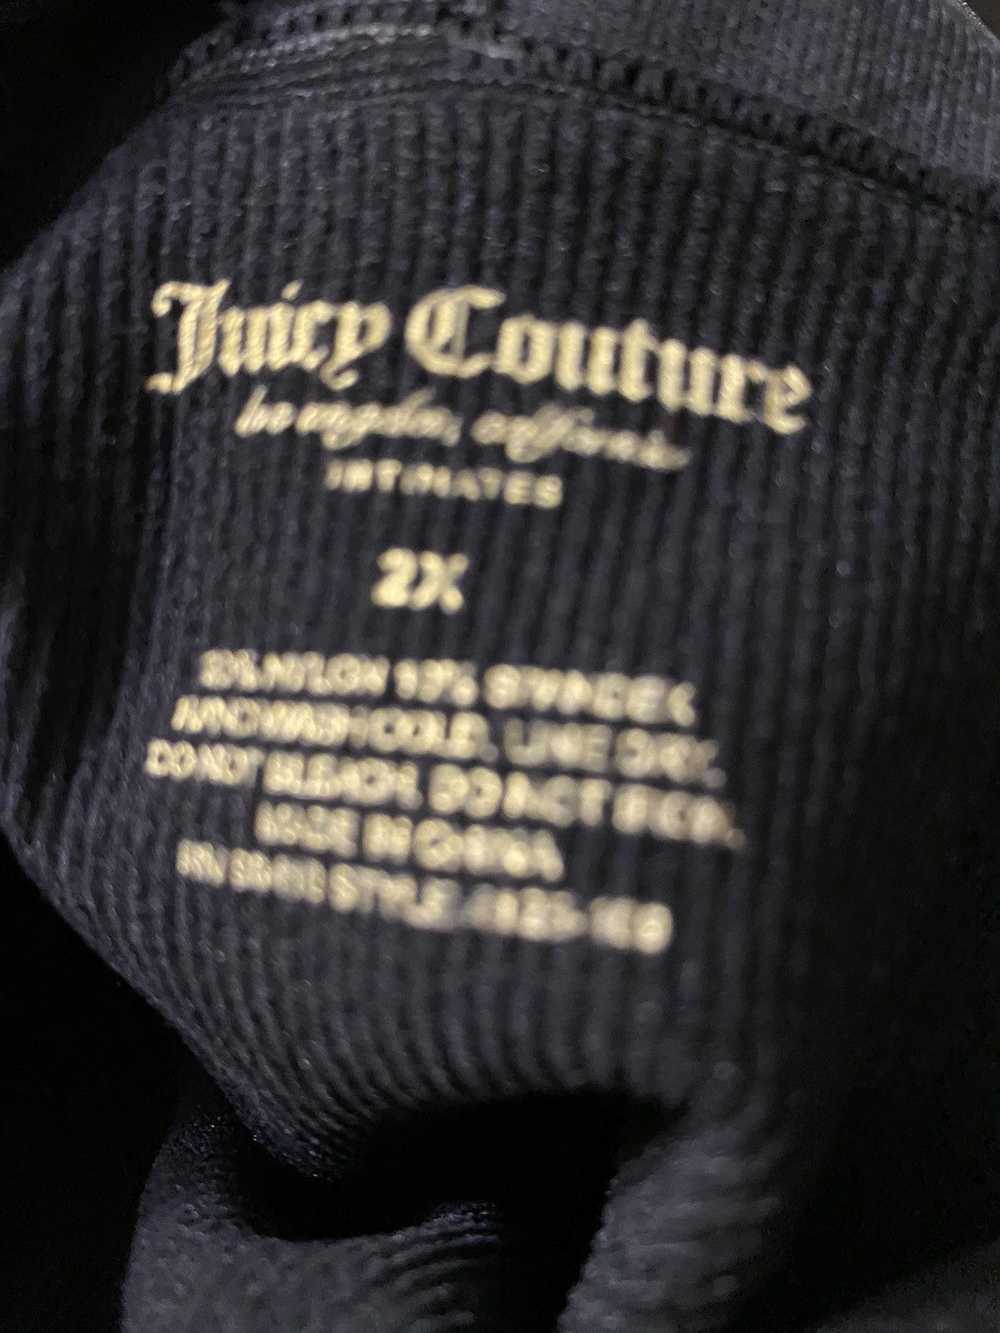 Juicy Couture Juicy Couture Black 2X Bike Shorts - image 2